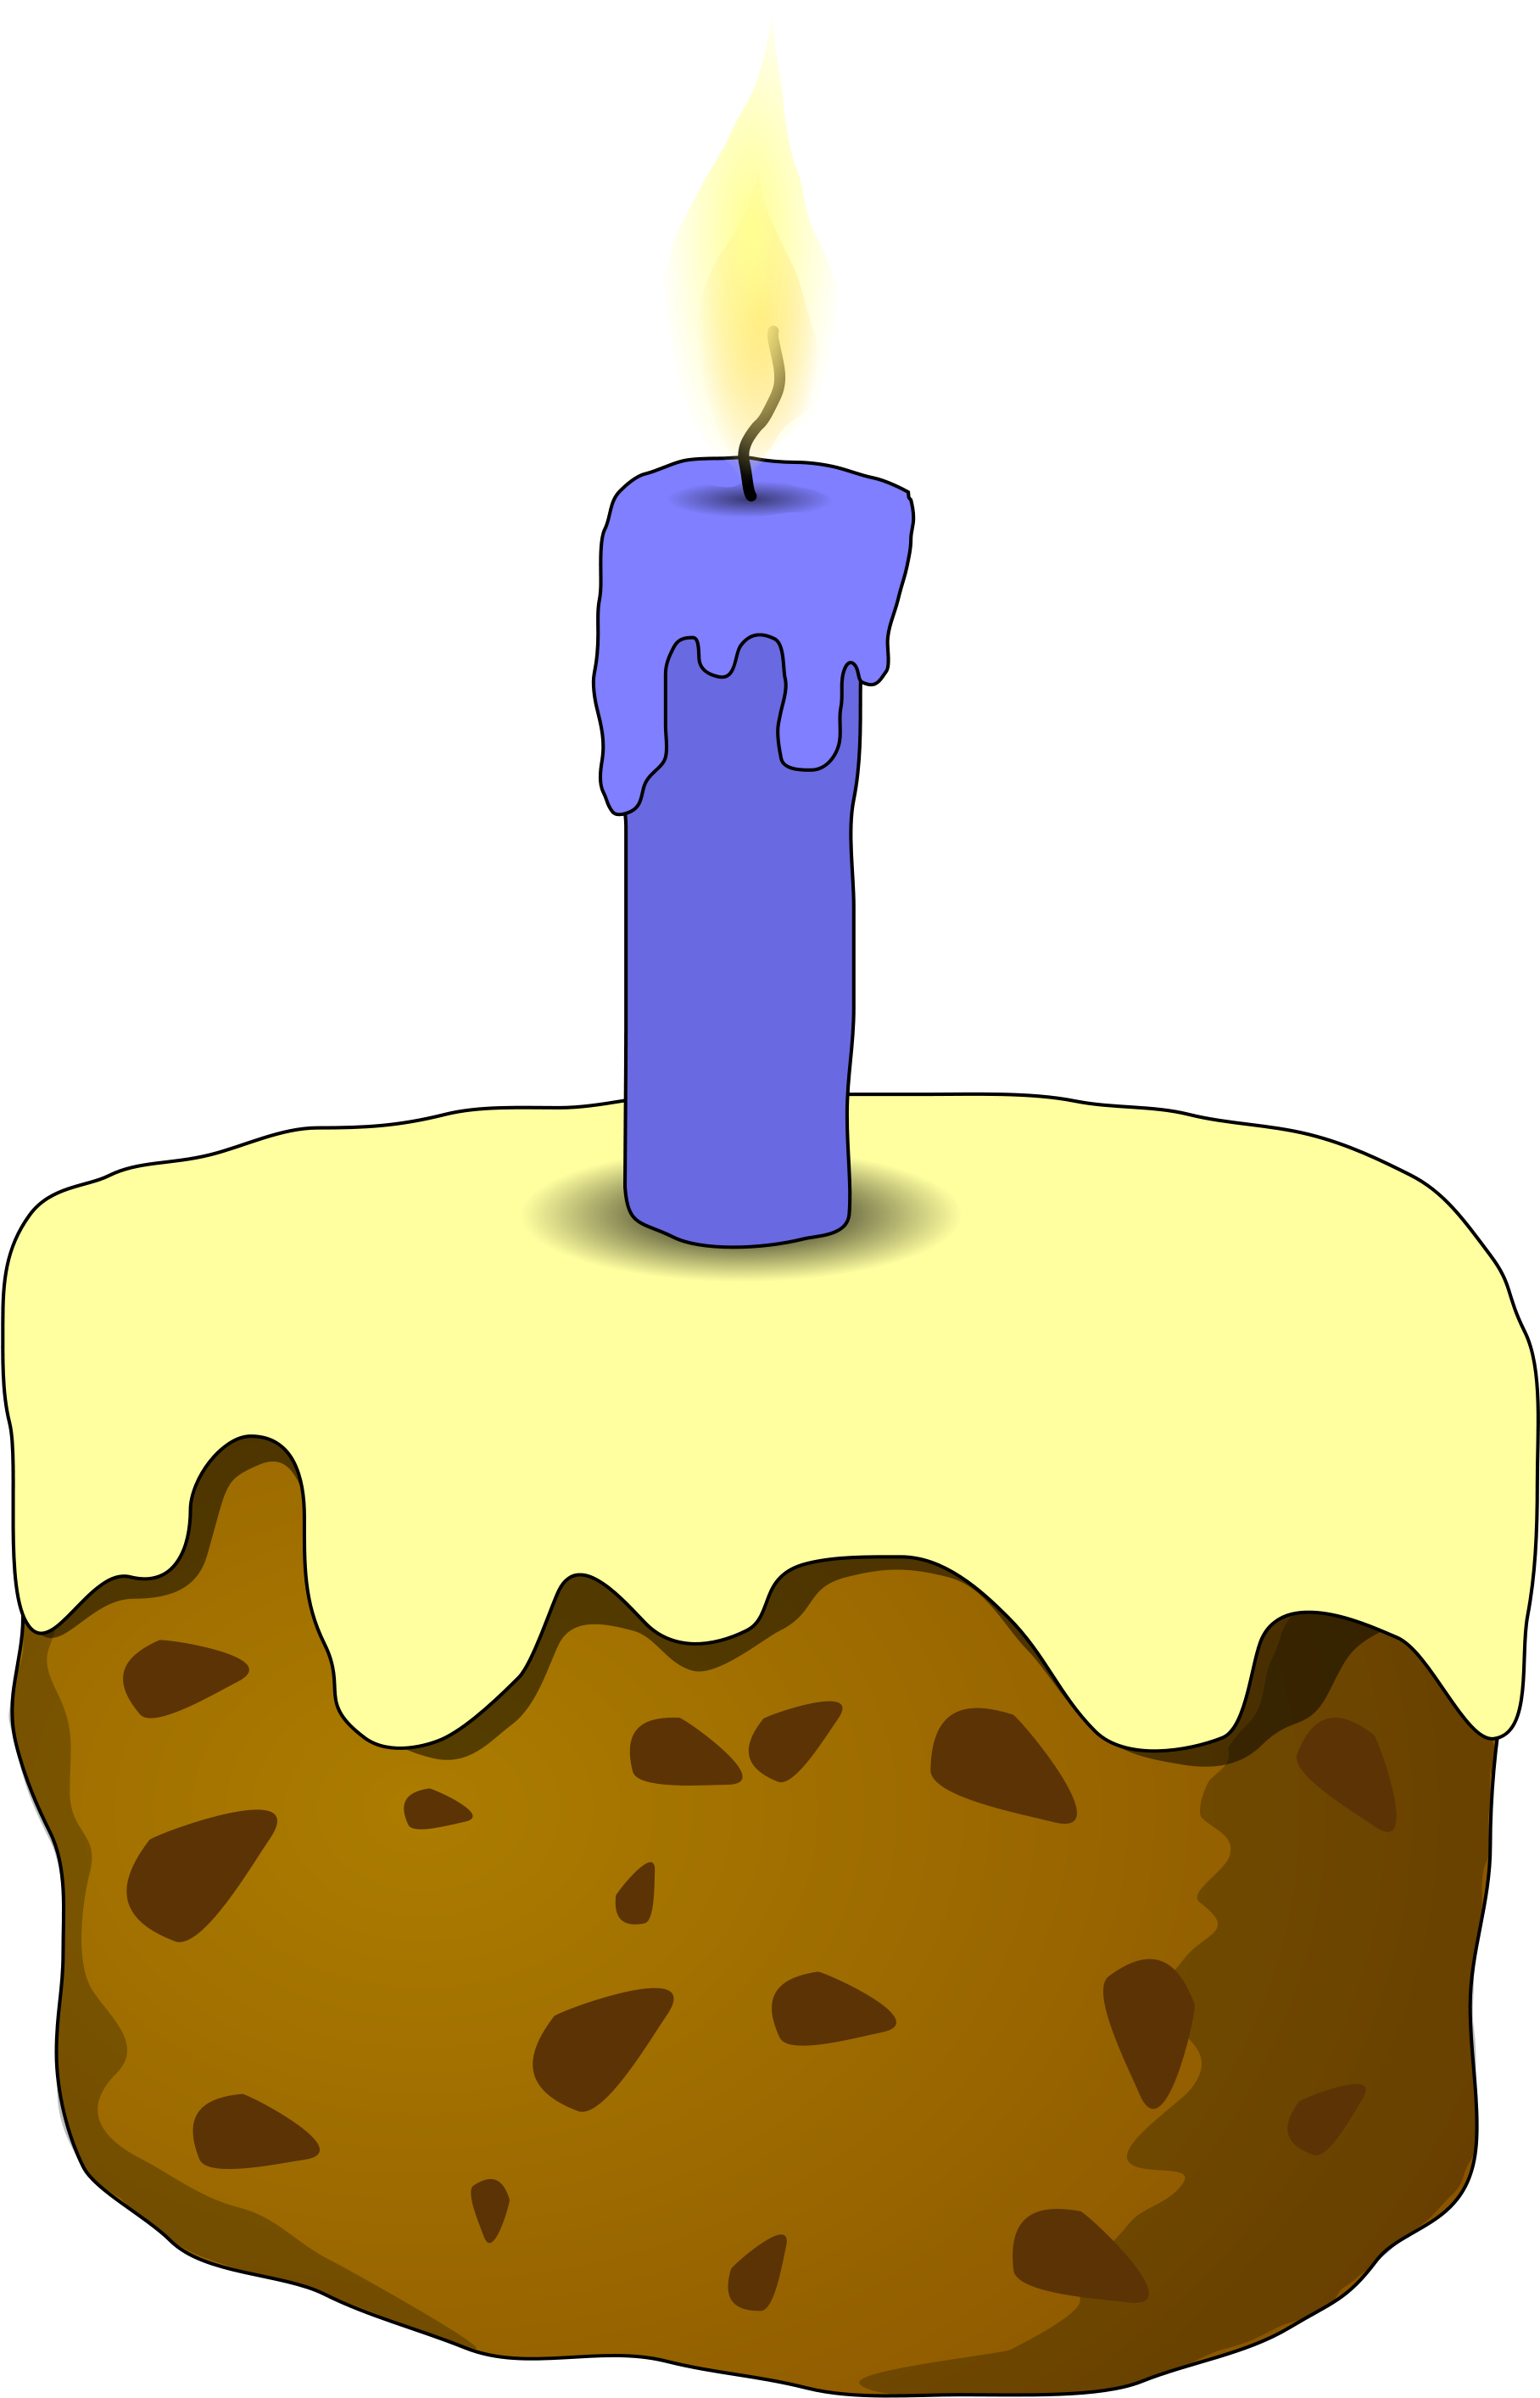 Cake And Candle - Cake With Candle (2000x3019)